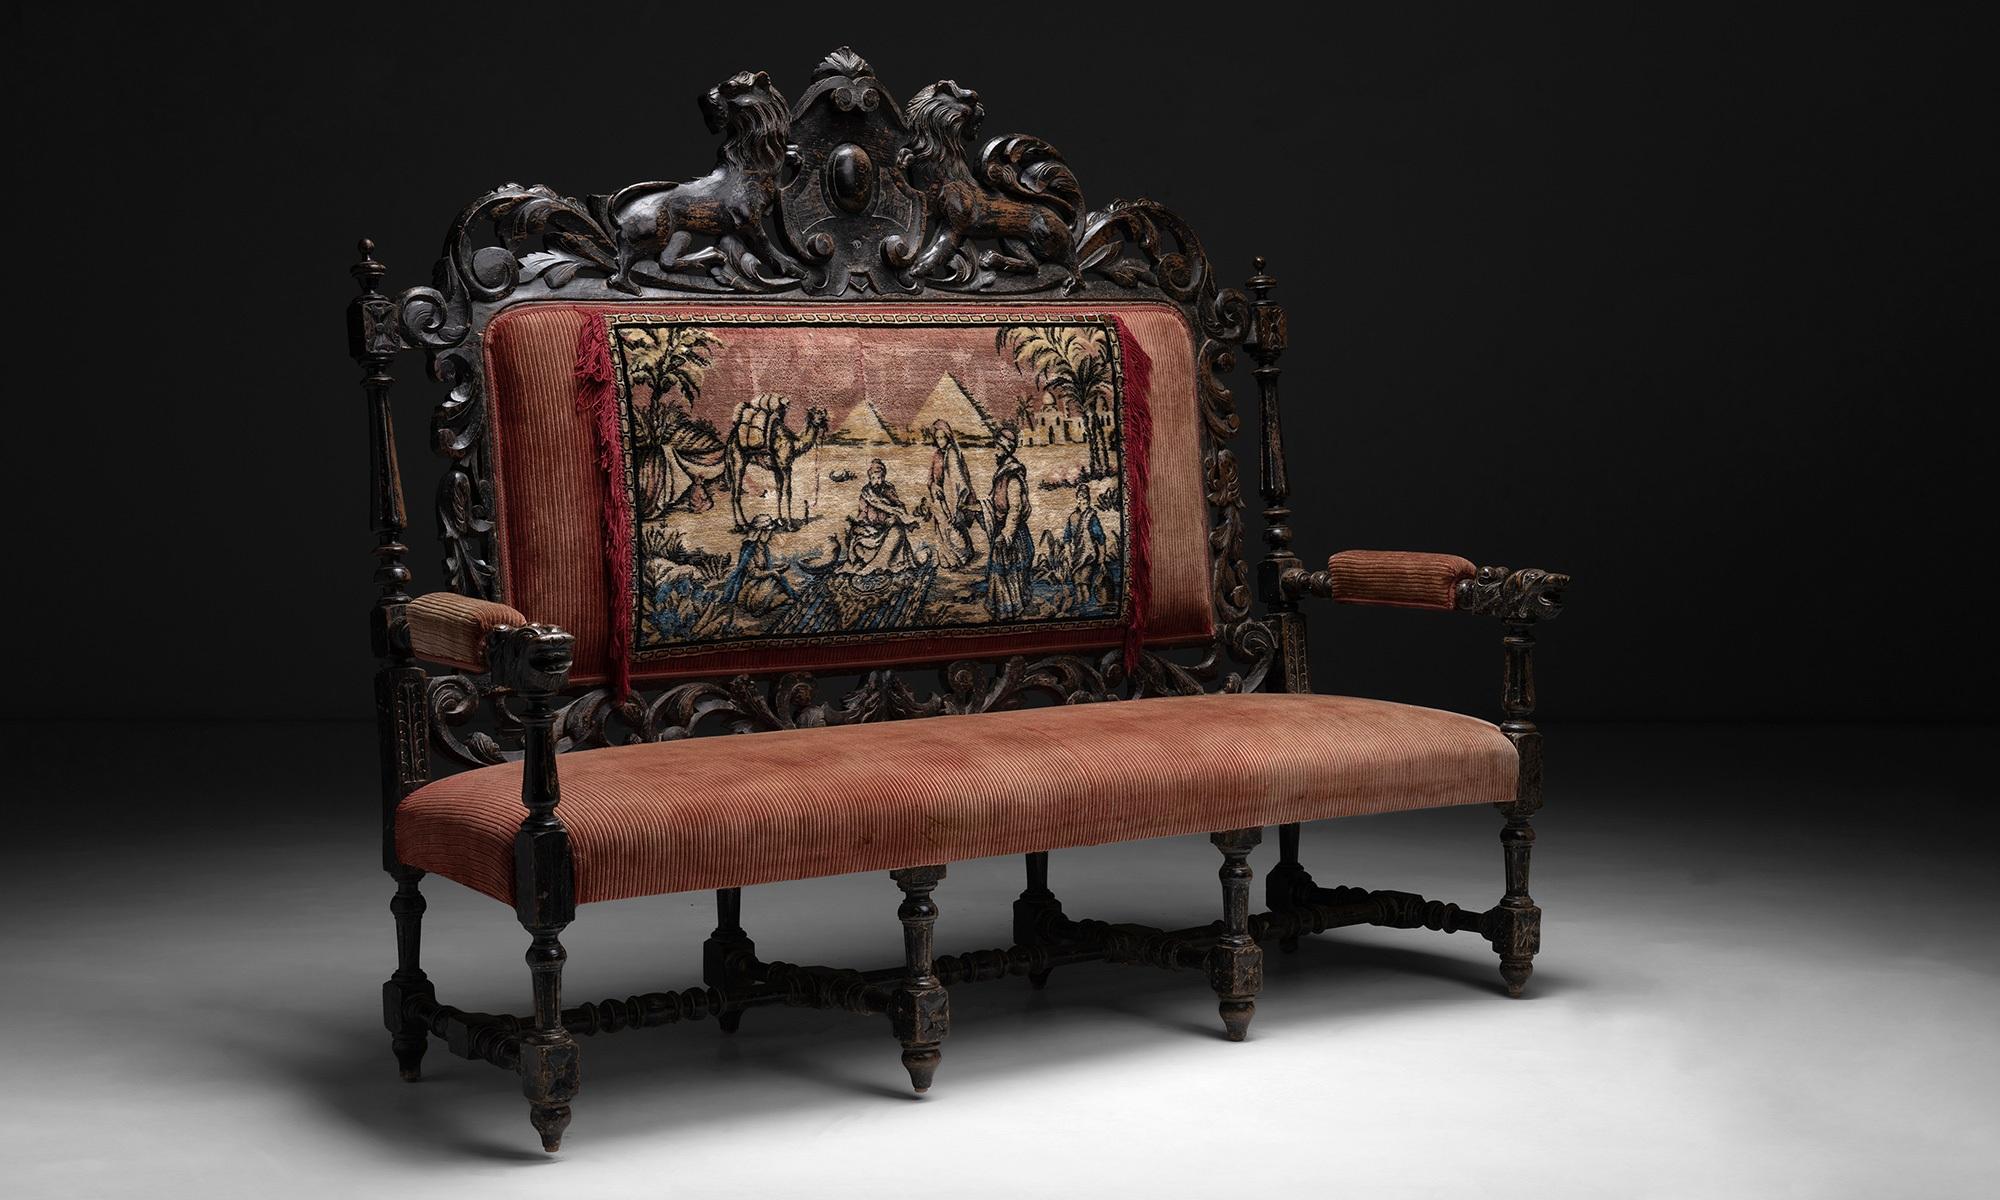 Country house settee.

England circa 1800

Original upholstery with tapestry panel depicting the pyramids of Egypt with carved frame. Originally from a Georgian era farmhouse in Devon.

Measures: 71.25”L x 26.5”D x 17.5”H x 58.75”seat.